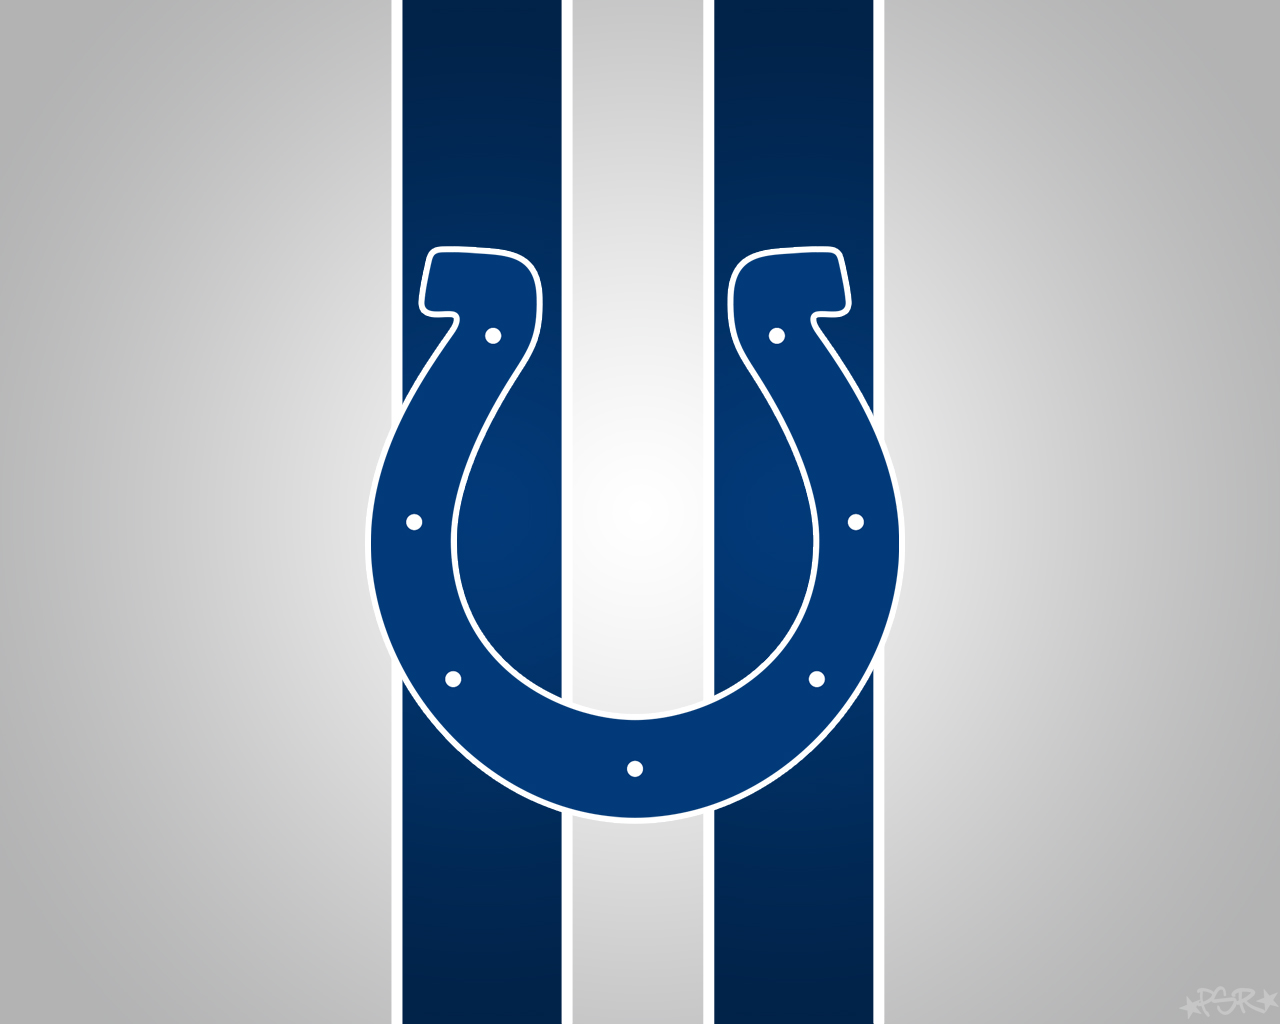 Indianapolis Colts Wallpaper Image In Collection